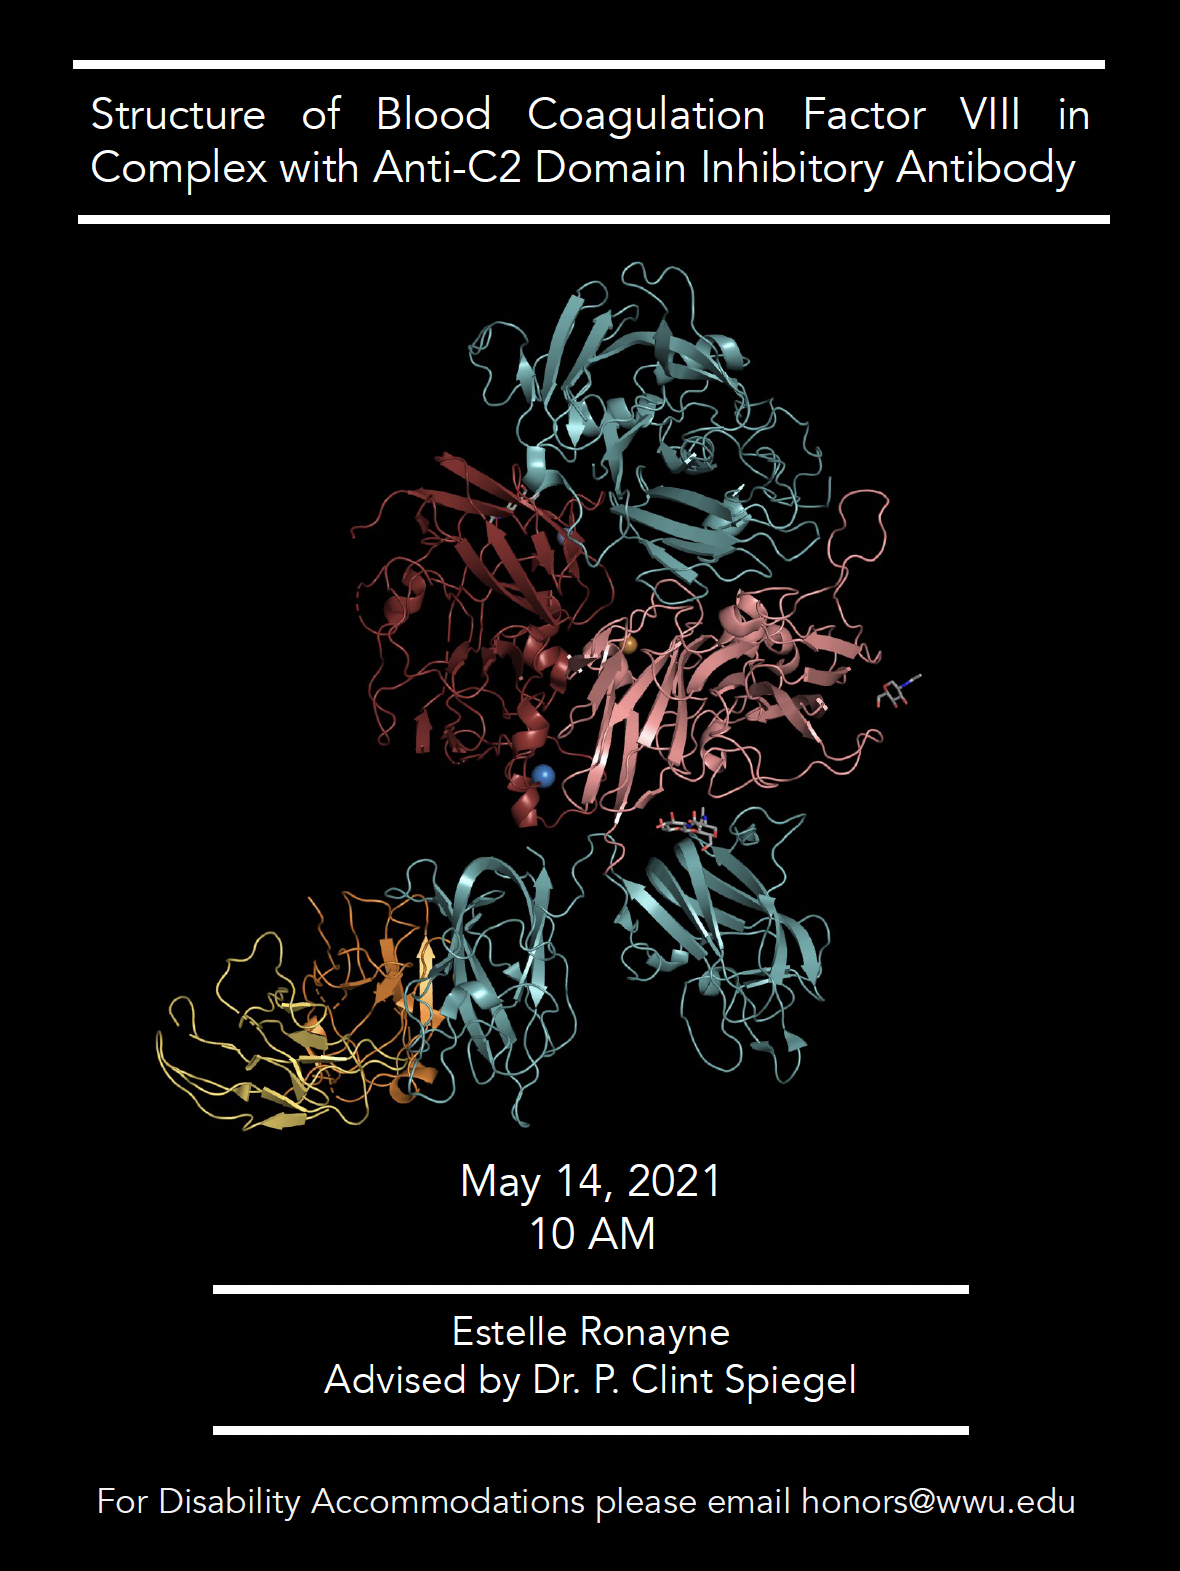 Black poster with white text and a digital rendition of Crystal Structure of Blood Coagulation Factor VIII in Complex with G99, an anti-C2 Inhibitory Antibody. PDBID: 7KBT. Text reads: "Structure of Blood Coagulation Factor VIII in Complex with Anti-C2 Domain Inhibitory Antibody. May 14, 2021, 10 AM. Estelle Ronayne, Advised by Dr. P. Clint Spiegel. For disability accommodations please email honors@wwu.edu". 